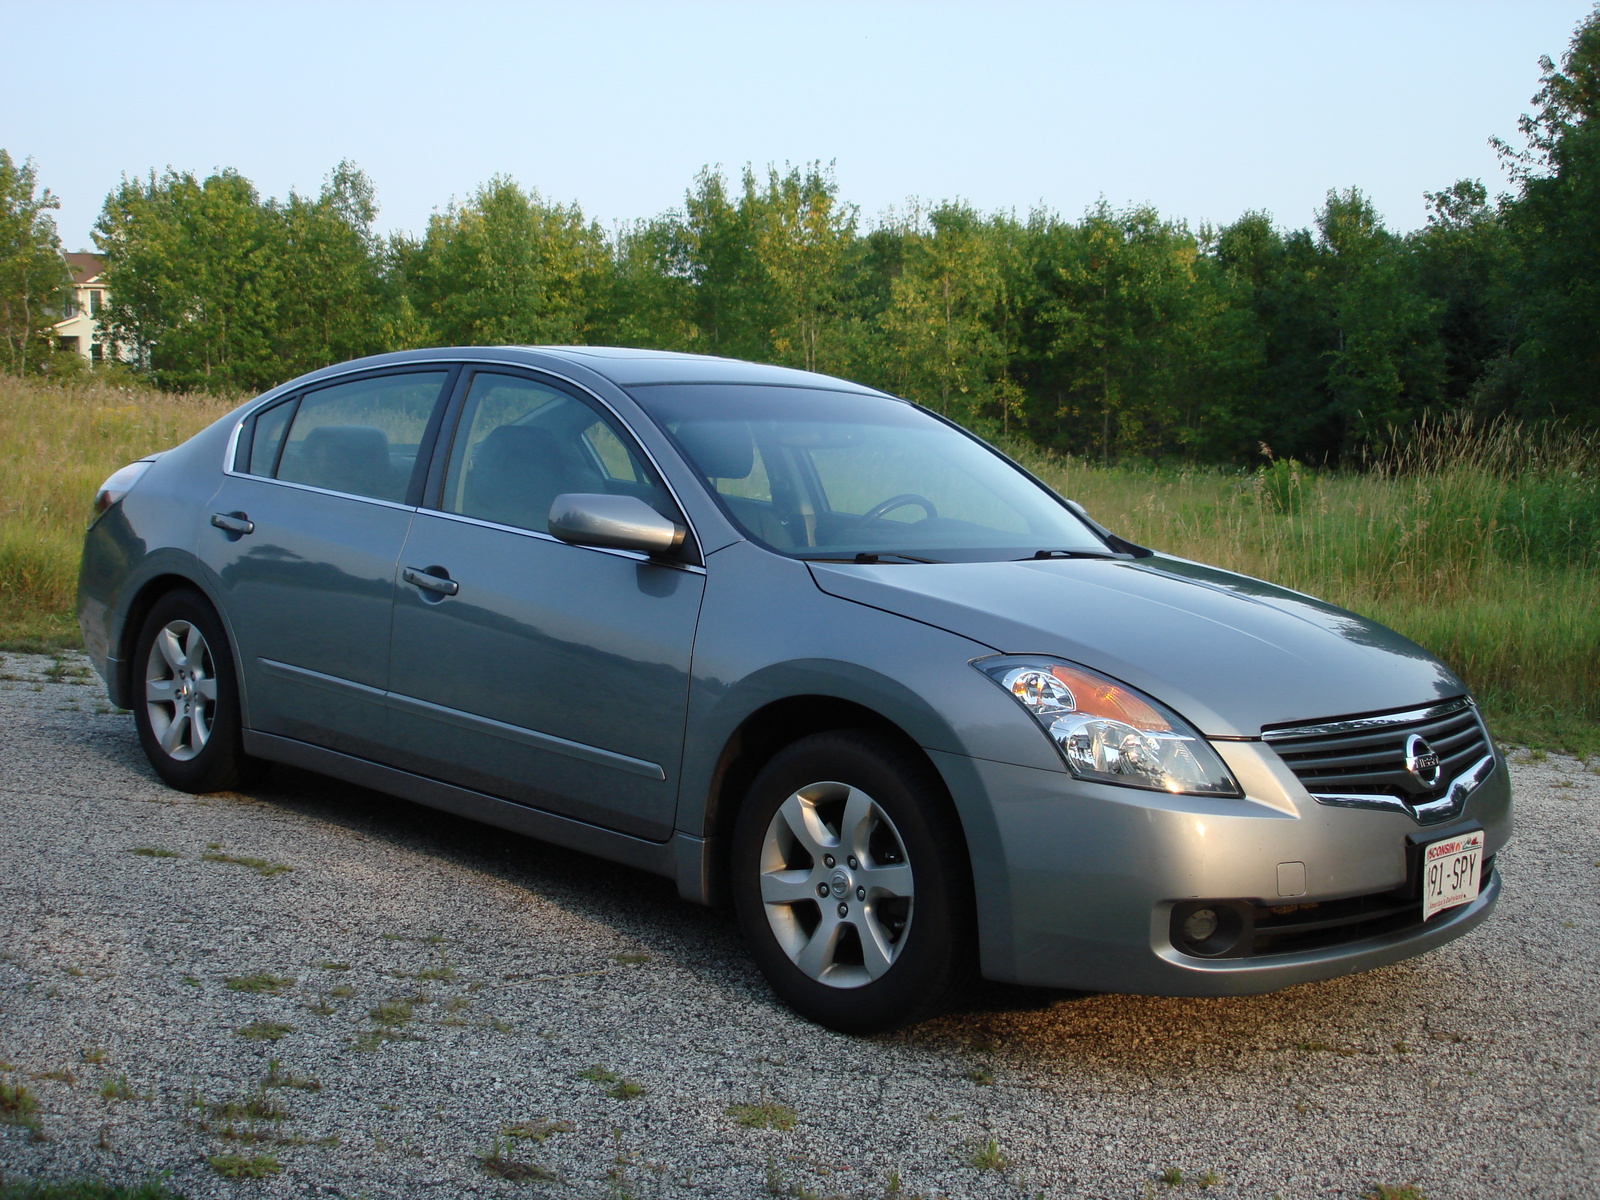 2008 Nissan altima coupe consumer review #5